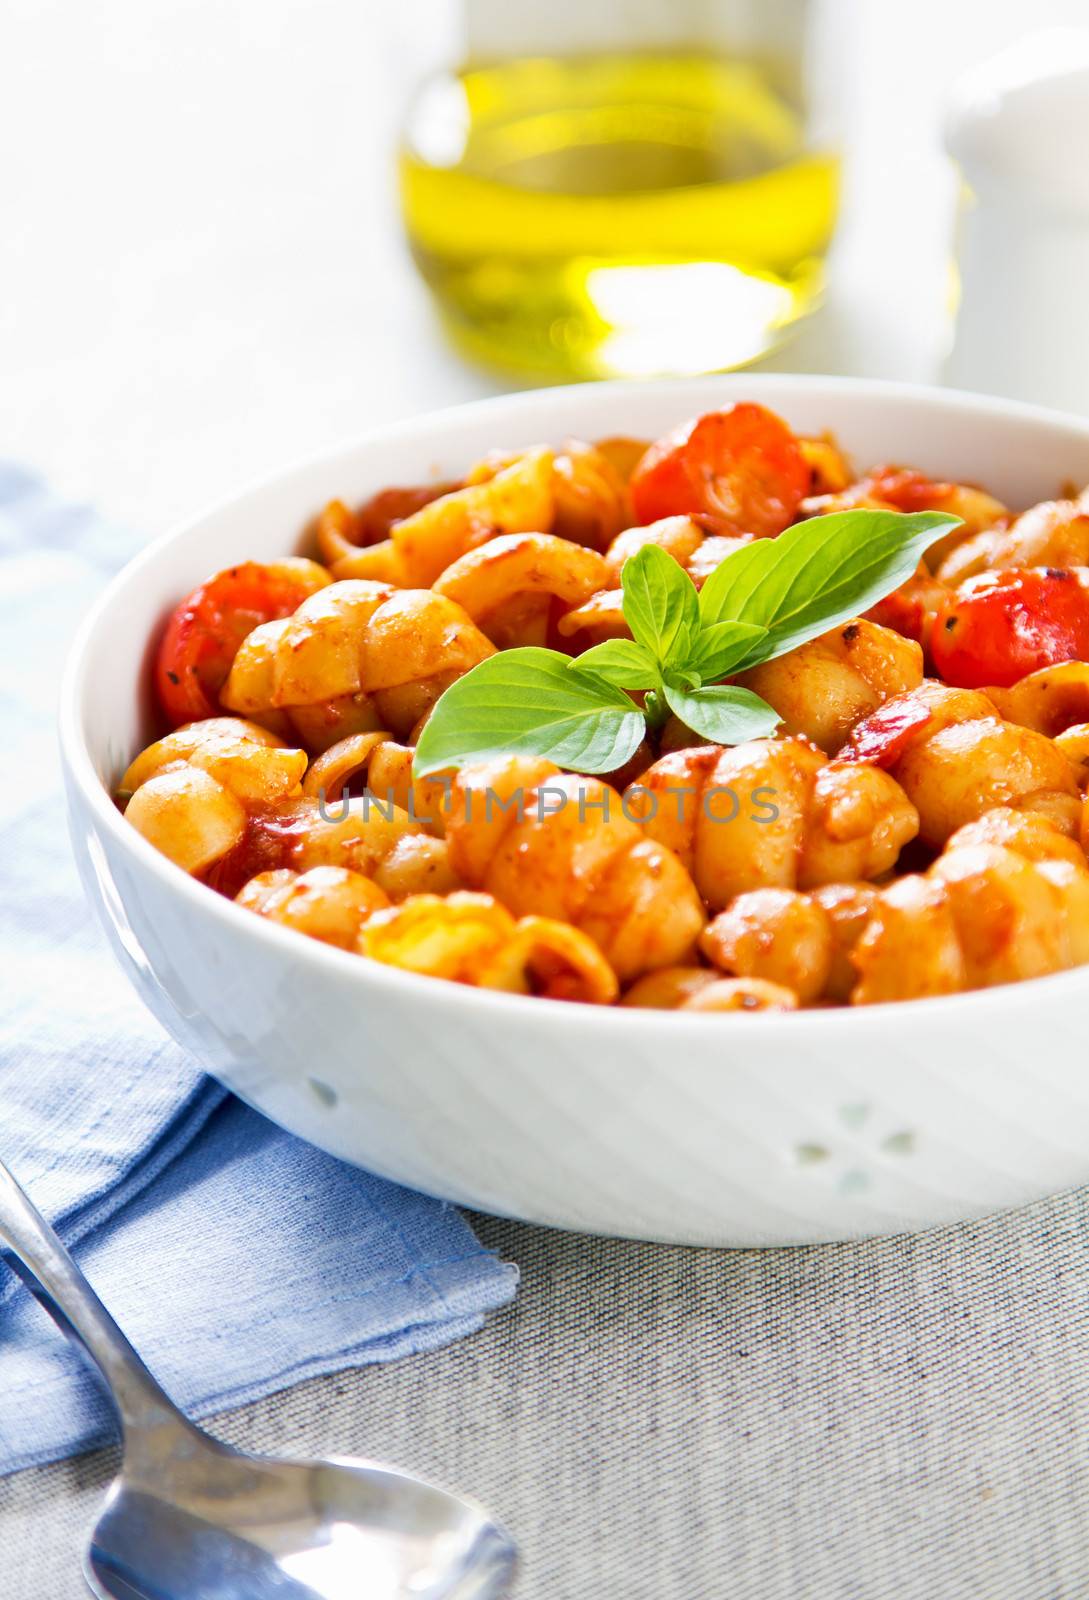 Gnocchi with tomato sauce by vanillaechoes